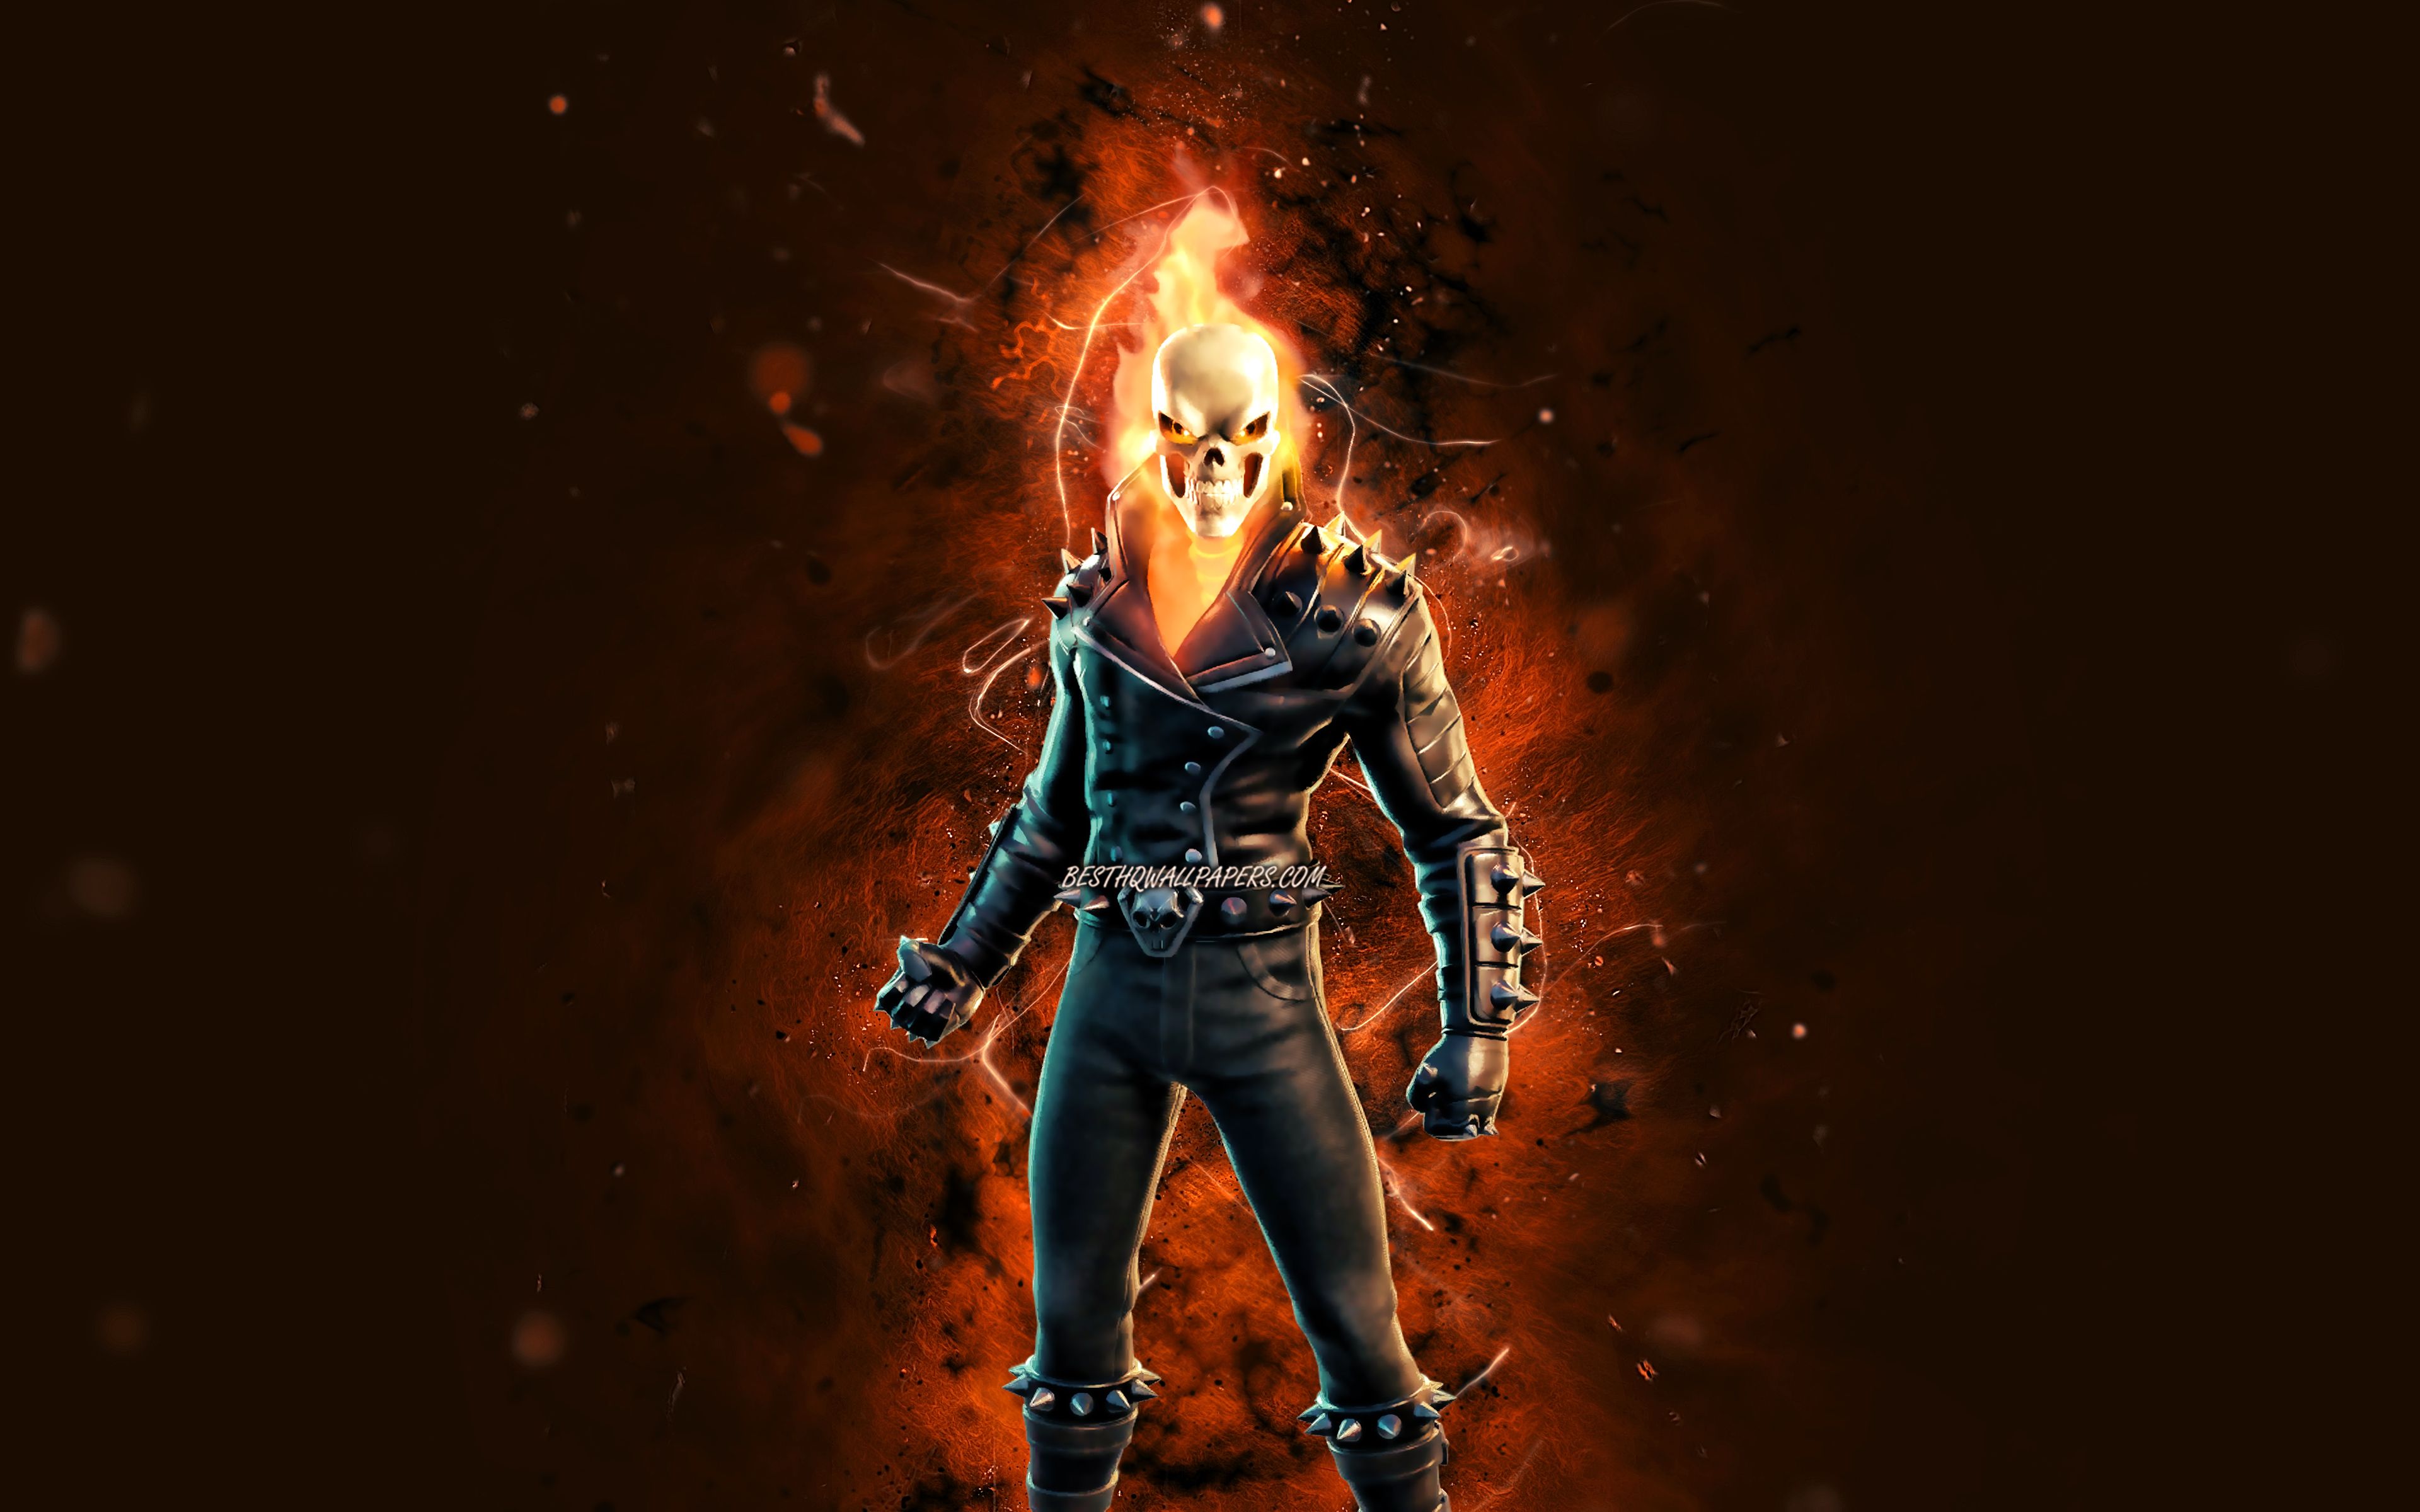 Download wallpaper Ghost Rider, 4k, orange neon lights, Fortnite Battle Royale, Fortnite characters, Ghost Rider Skin, Fortnite, Ghost Rider Fortnite for desktop with resolution 3840x2400. High Quality HD picture wallpaper